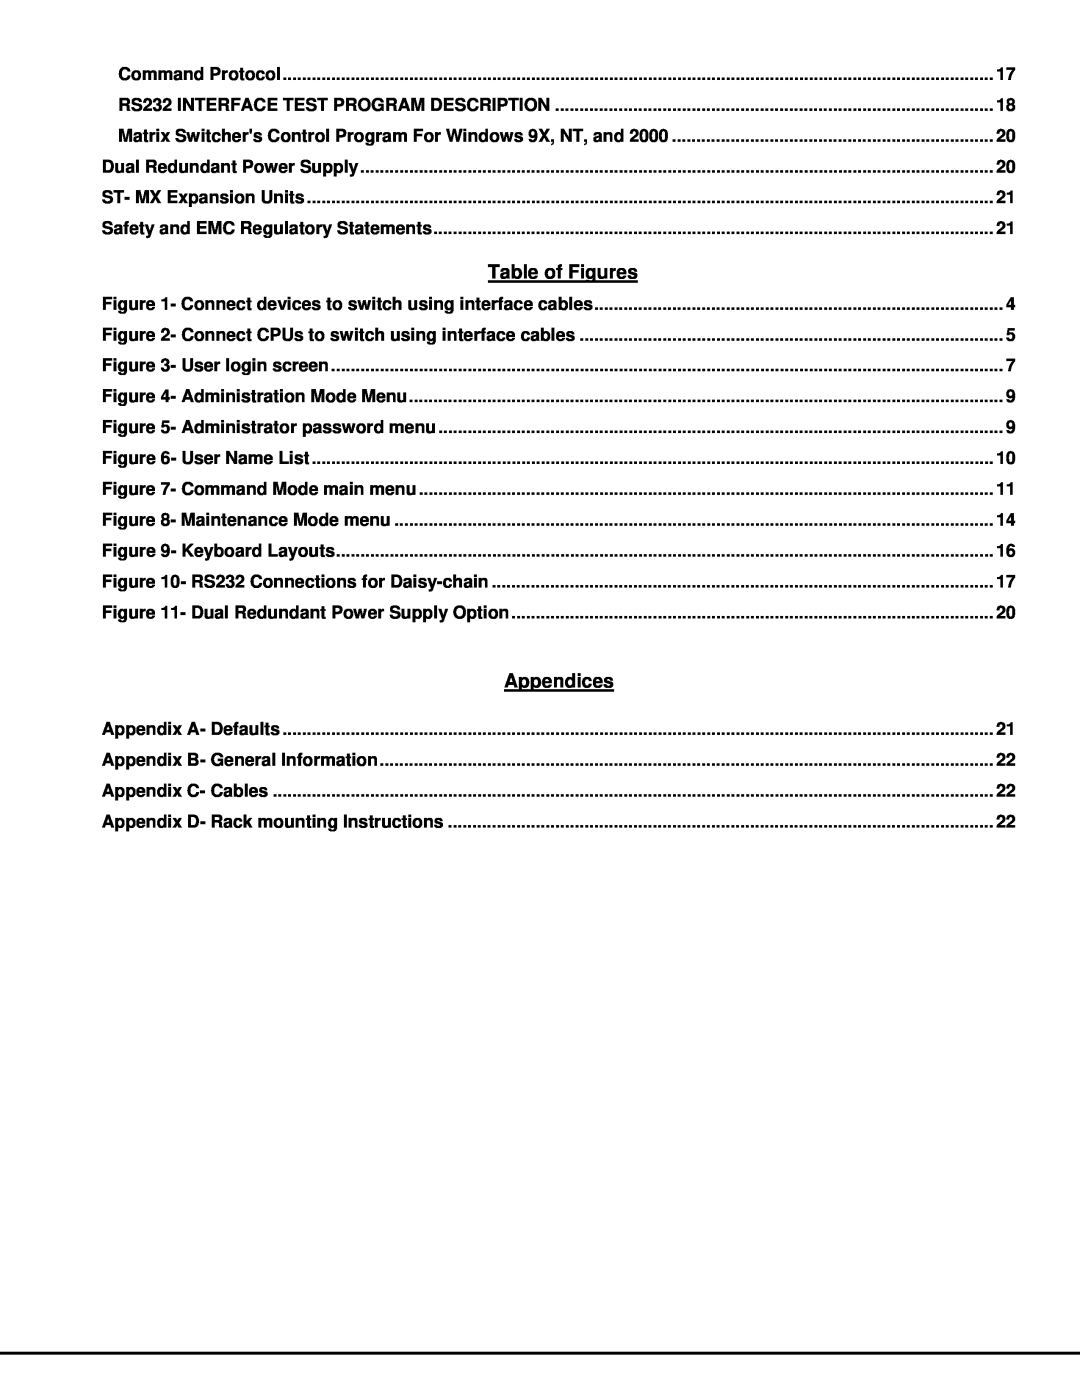 Network Technologies ST-NXM-U-HD manual Table of Figures, Appendices 